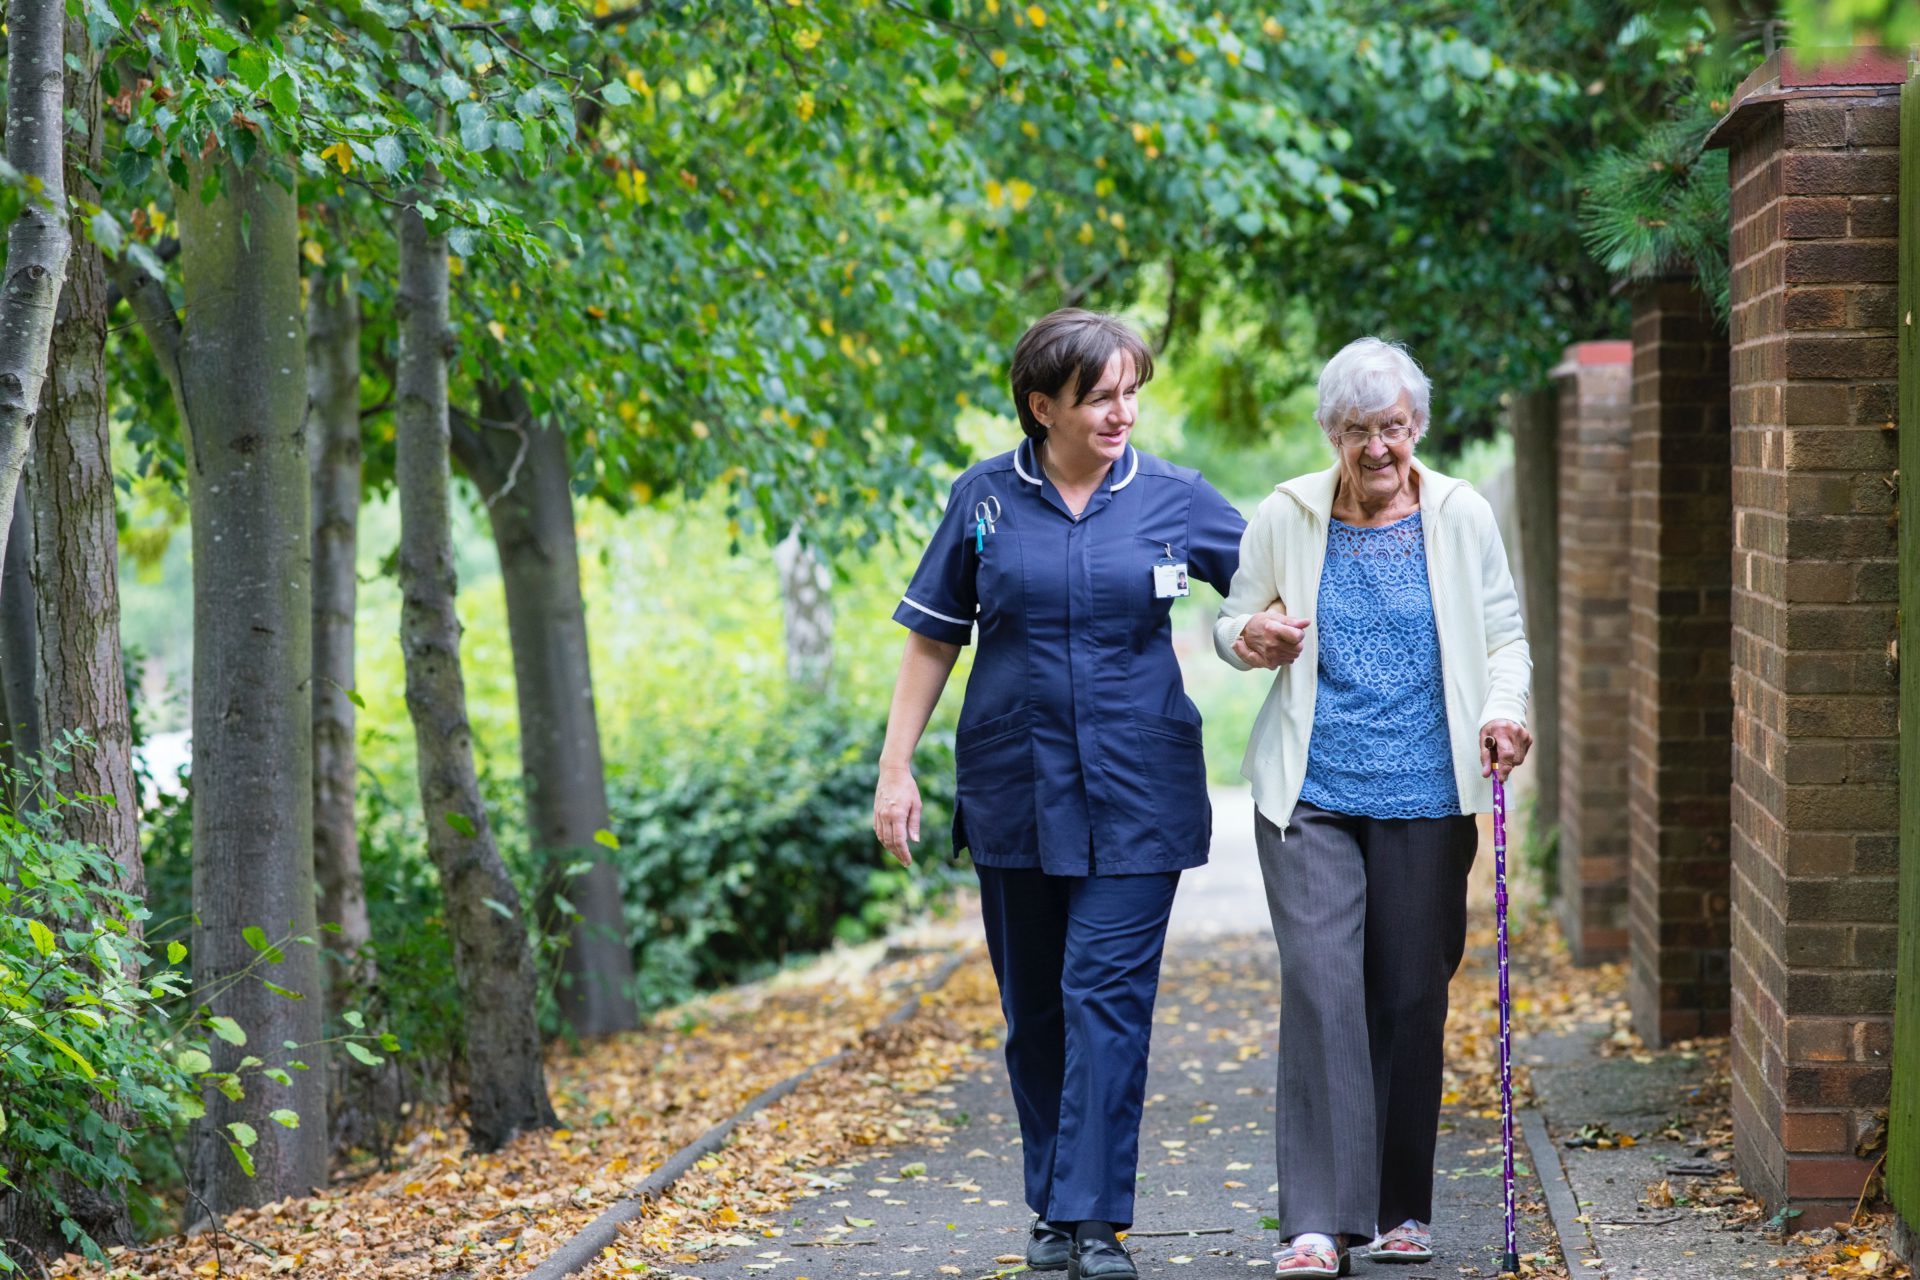 Older lady with walking stick, walking towards the camera supported by female NHS employee